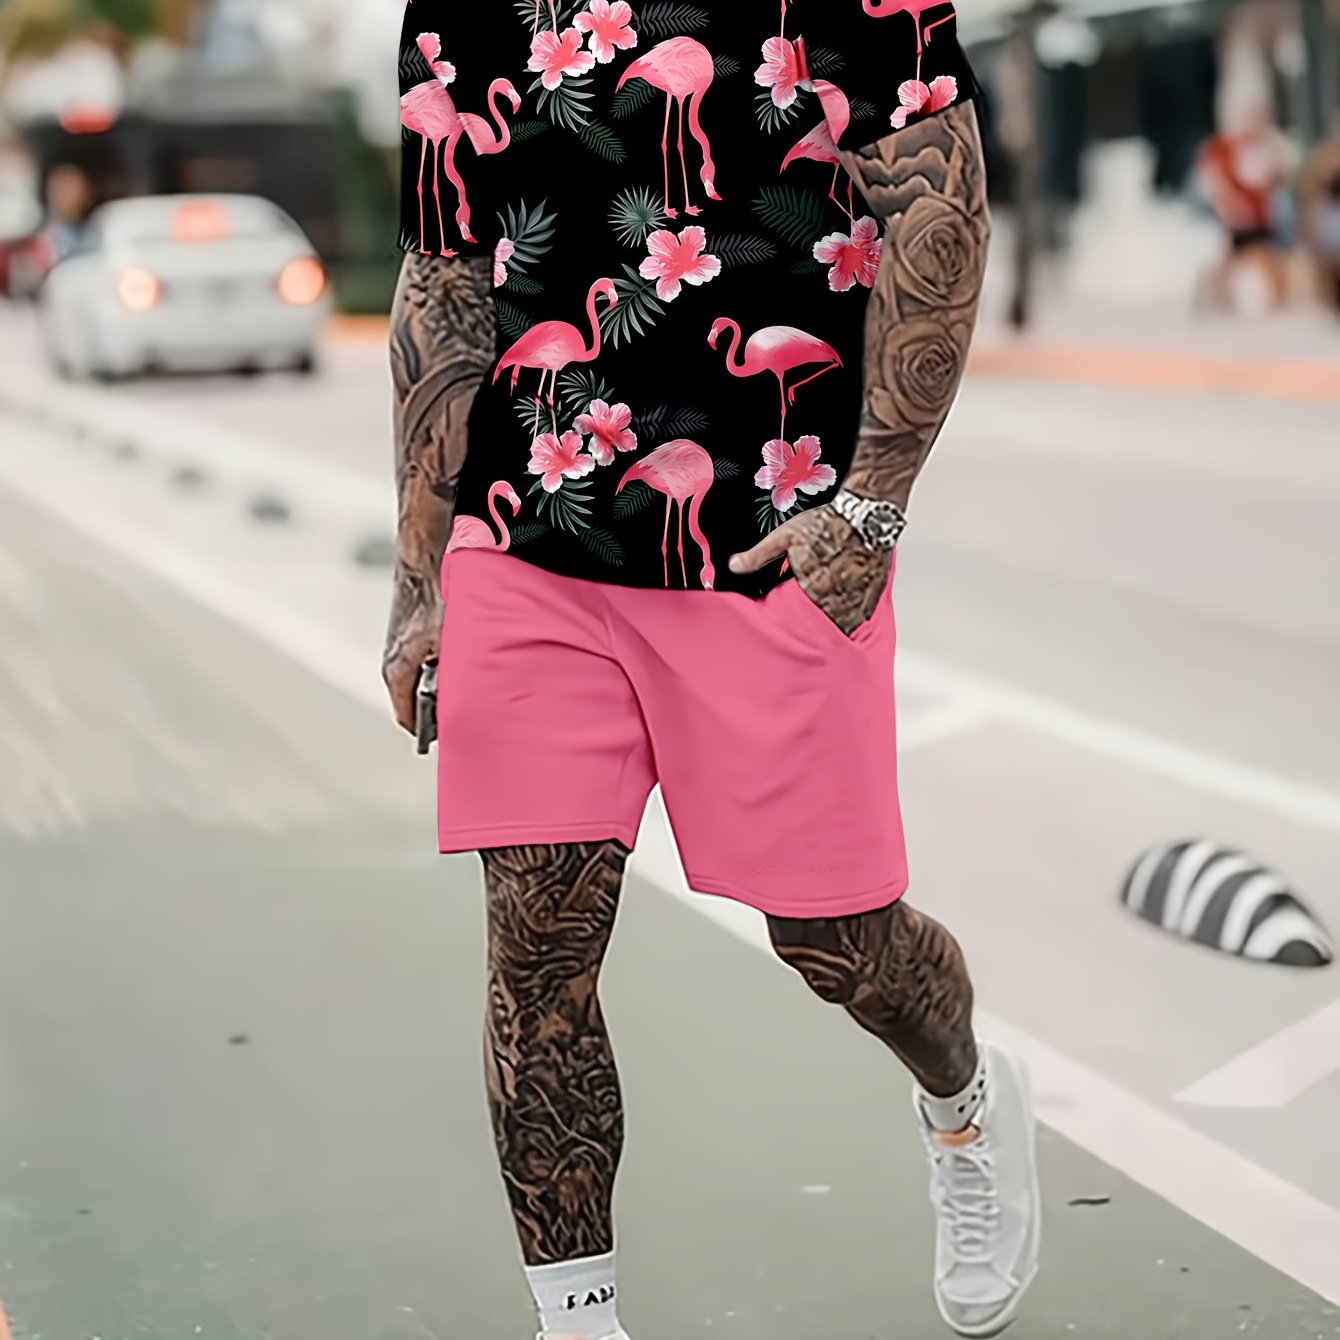 

2-piece Men's Trendy Summer Beach Vacation Outfit Set, Men's Flamingo And Leaves Pattern Short Sleeve T-shirt & Solid Shorts Set